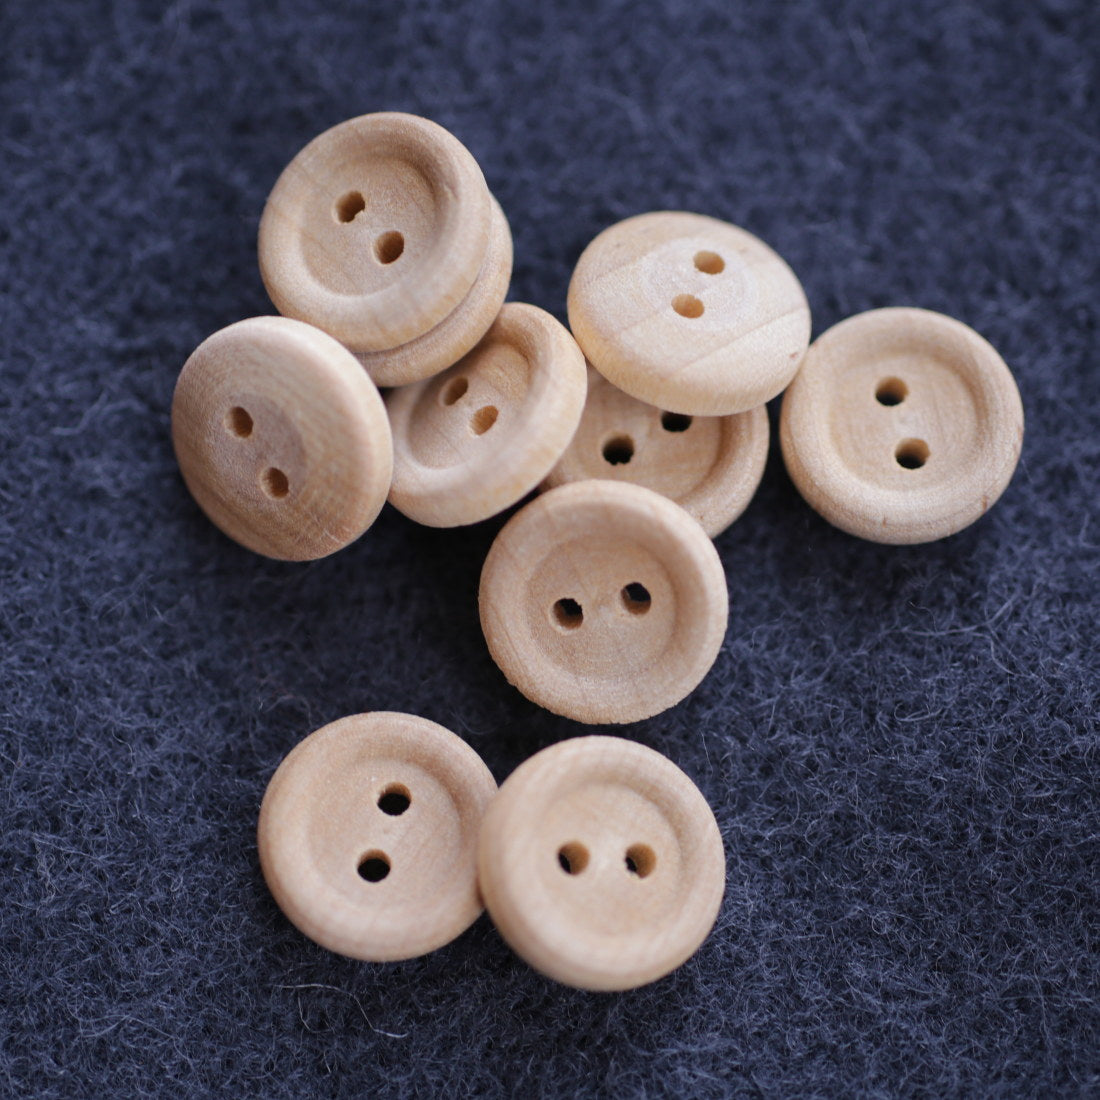 2-Hole Wood Button, WB-1600-240